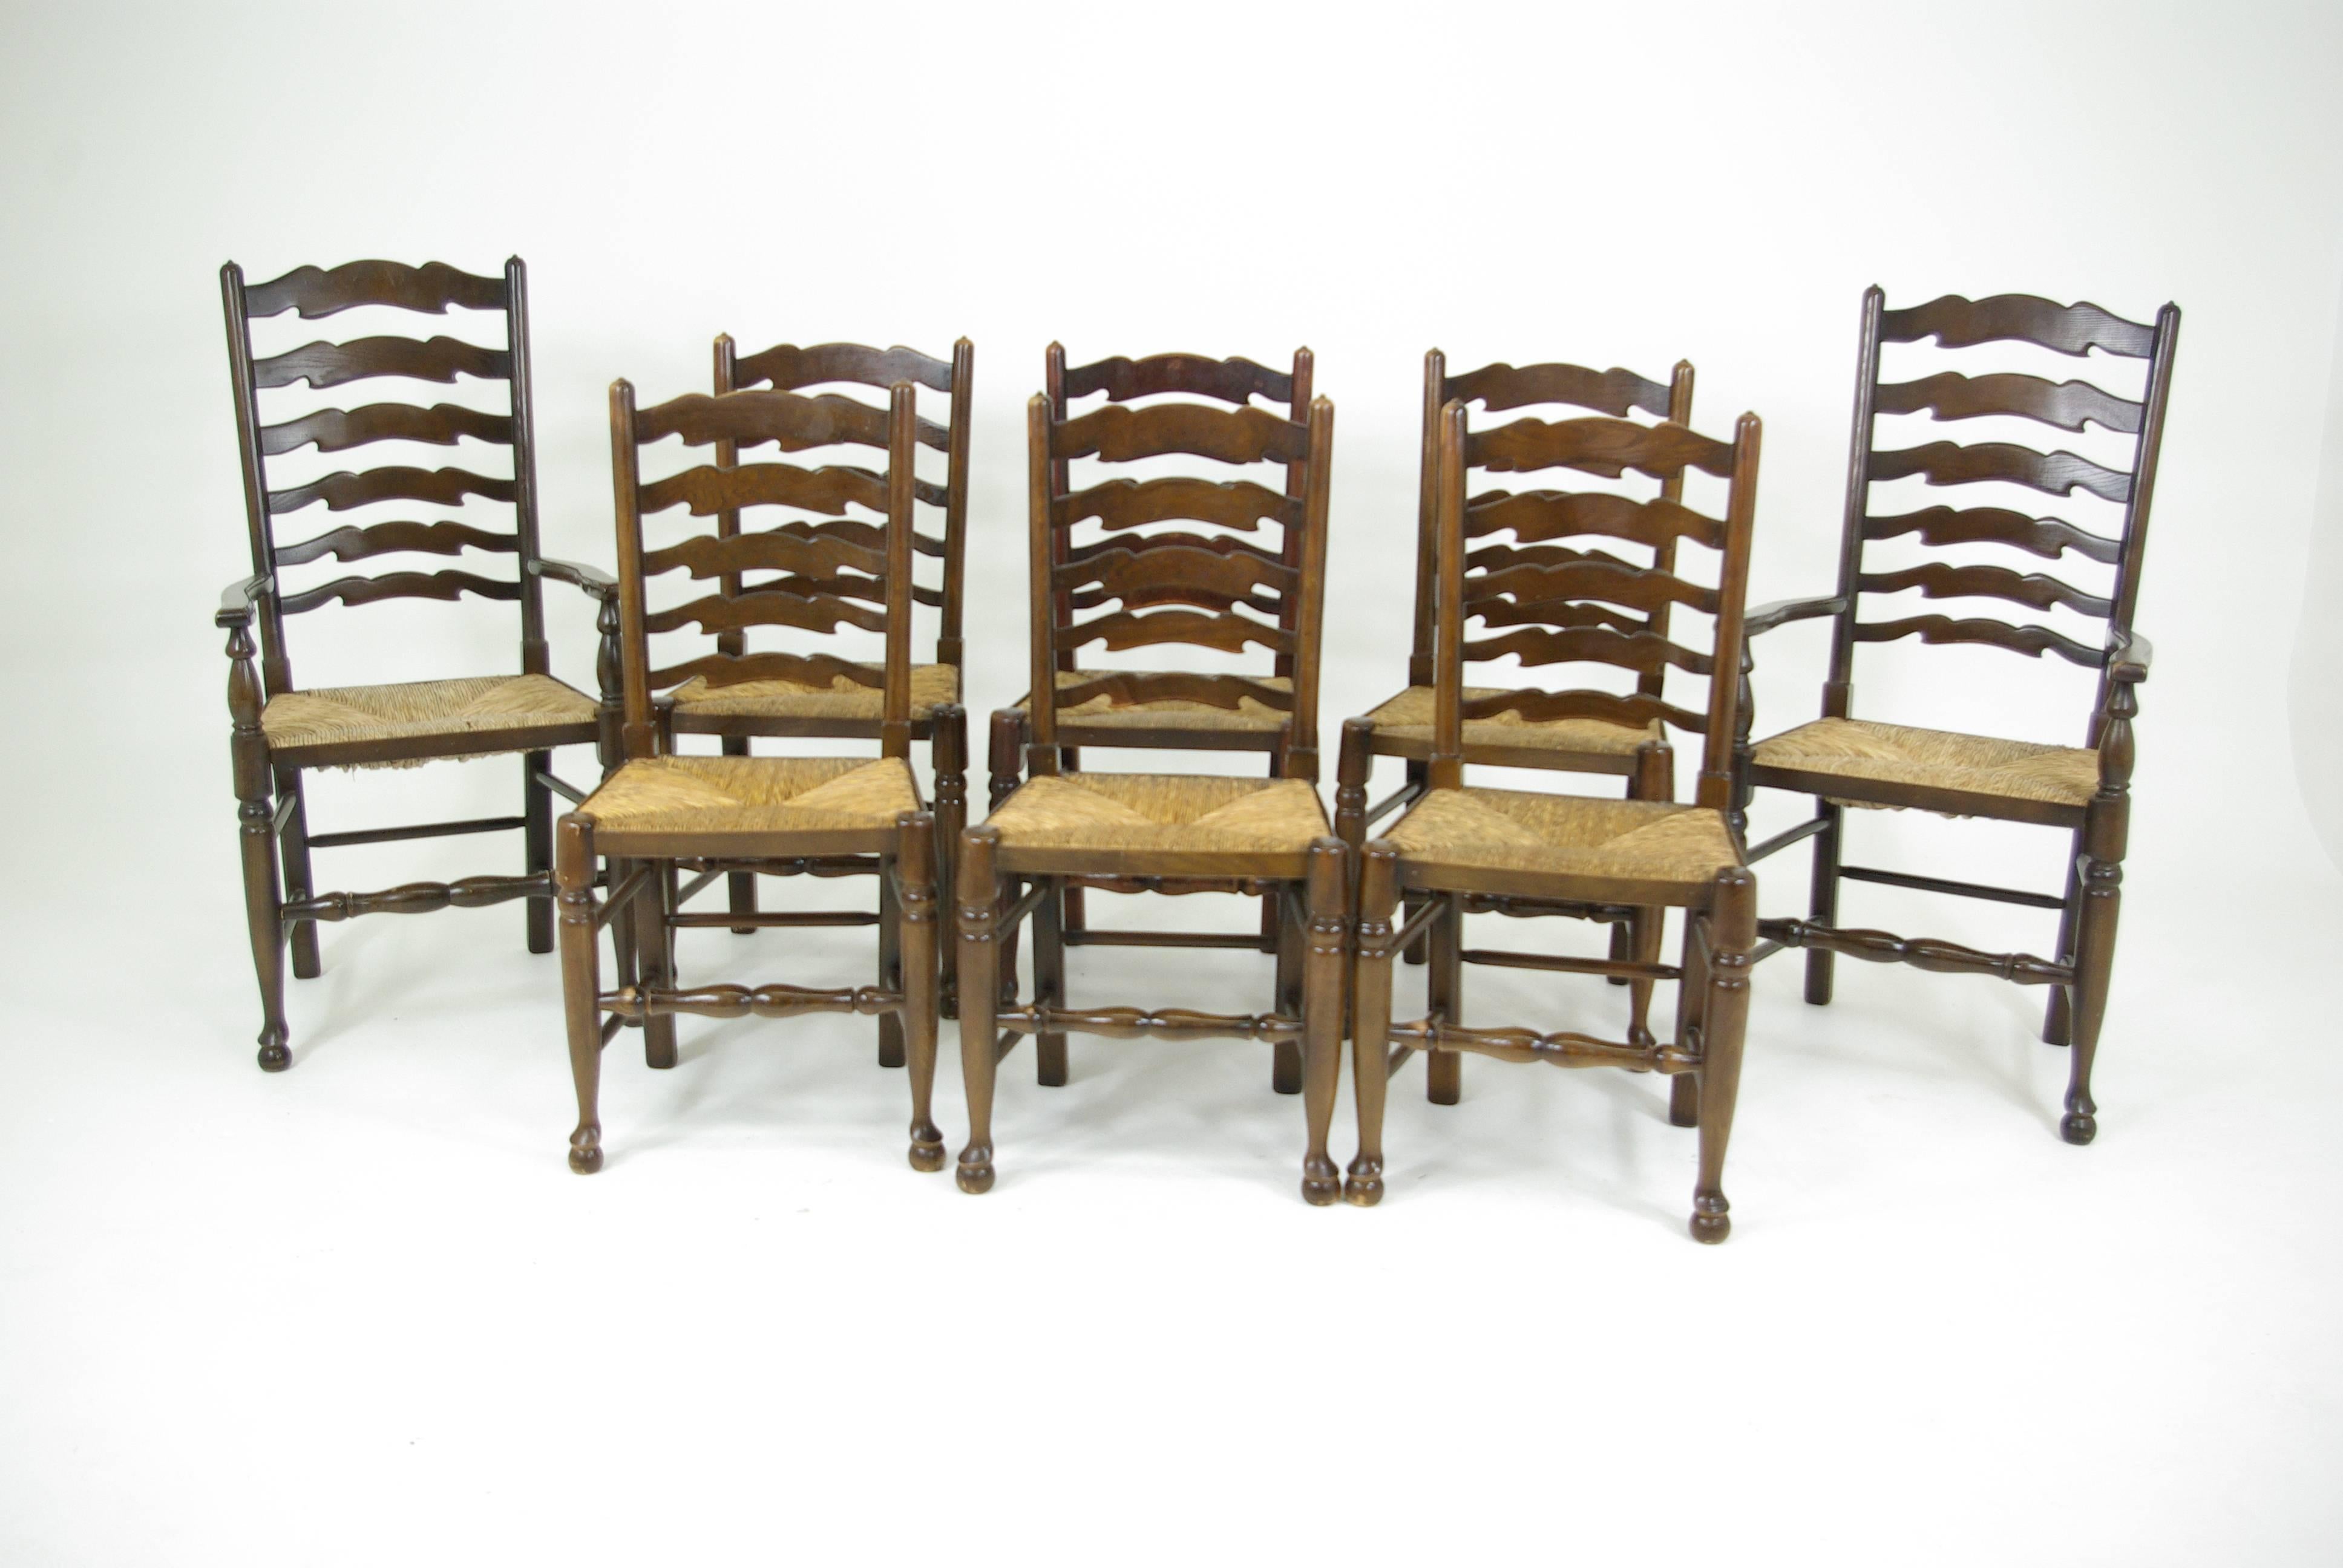 Scotland, 1930.
Solid oak and elm construction.
Original finish in
rush seats in excellent condition.
All joints are tight.

$1450 for the set of eight. 

Item #B319.
Armchair 22